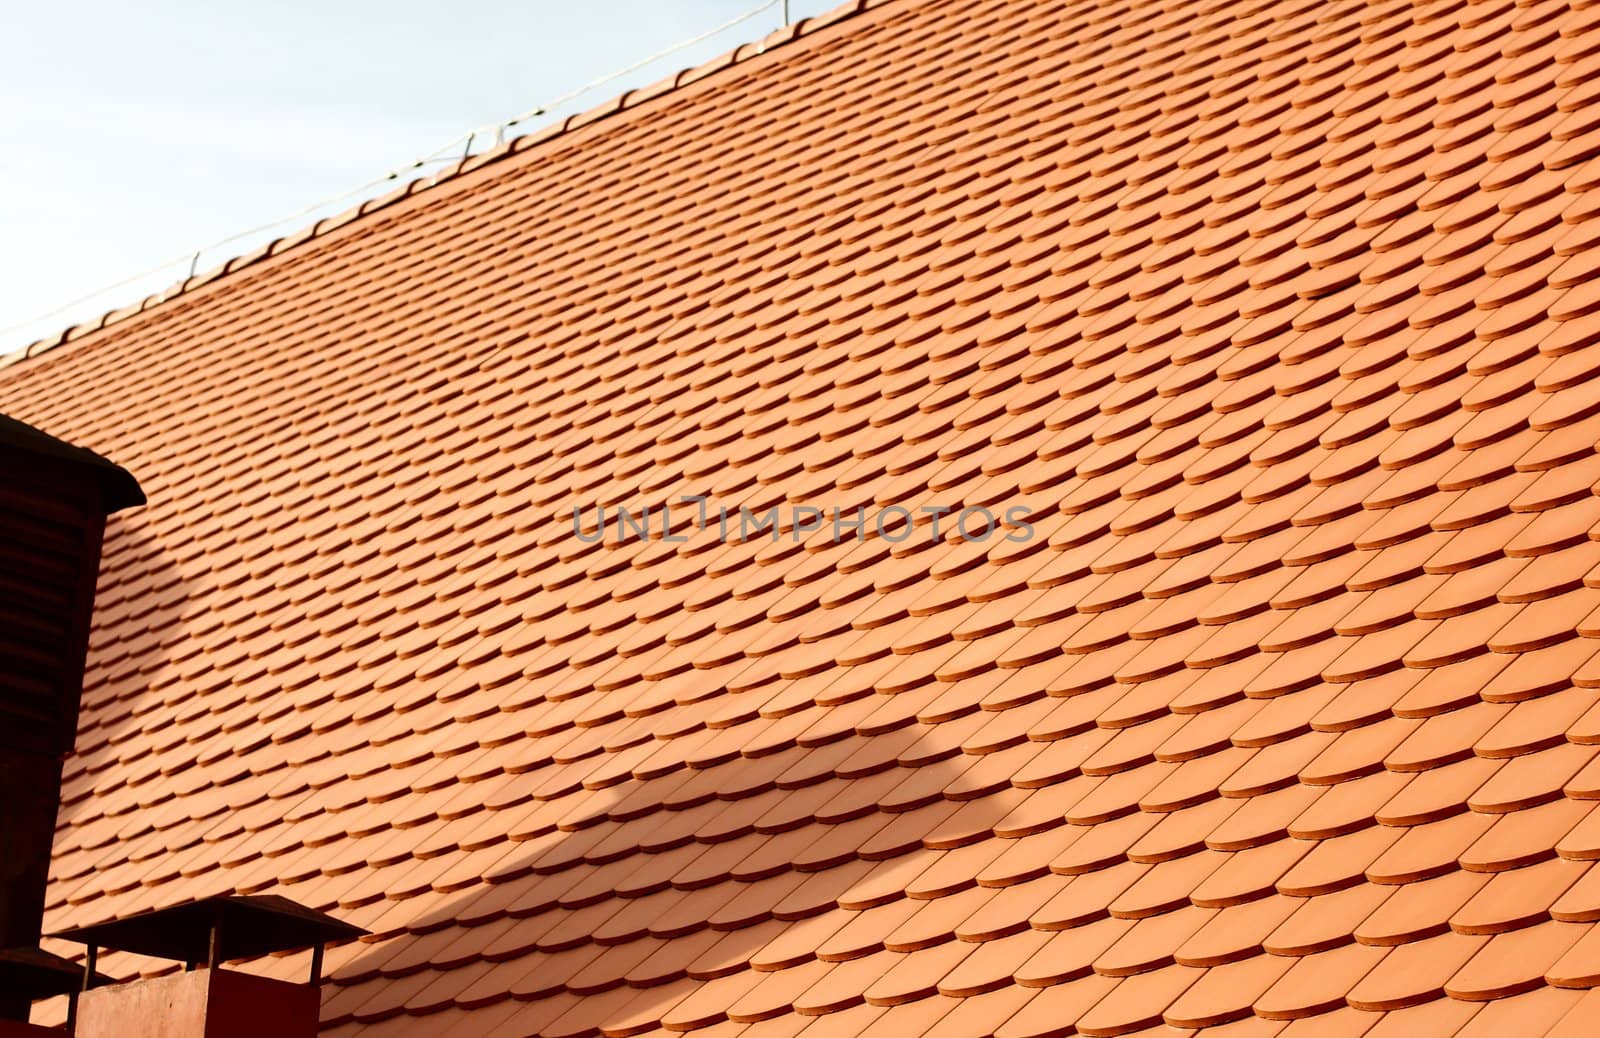 Roof with bright brown tiles